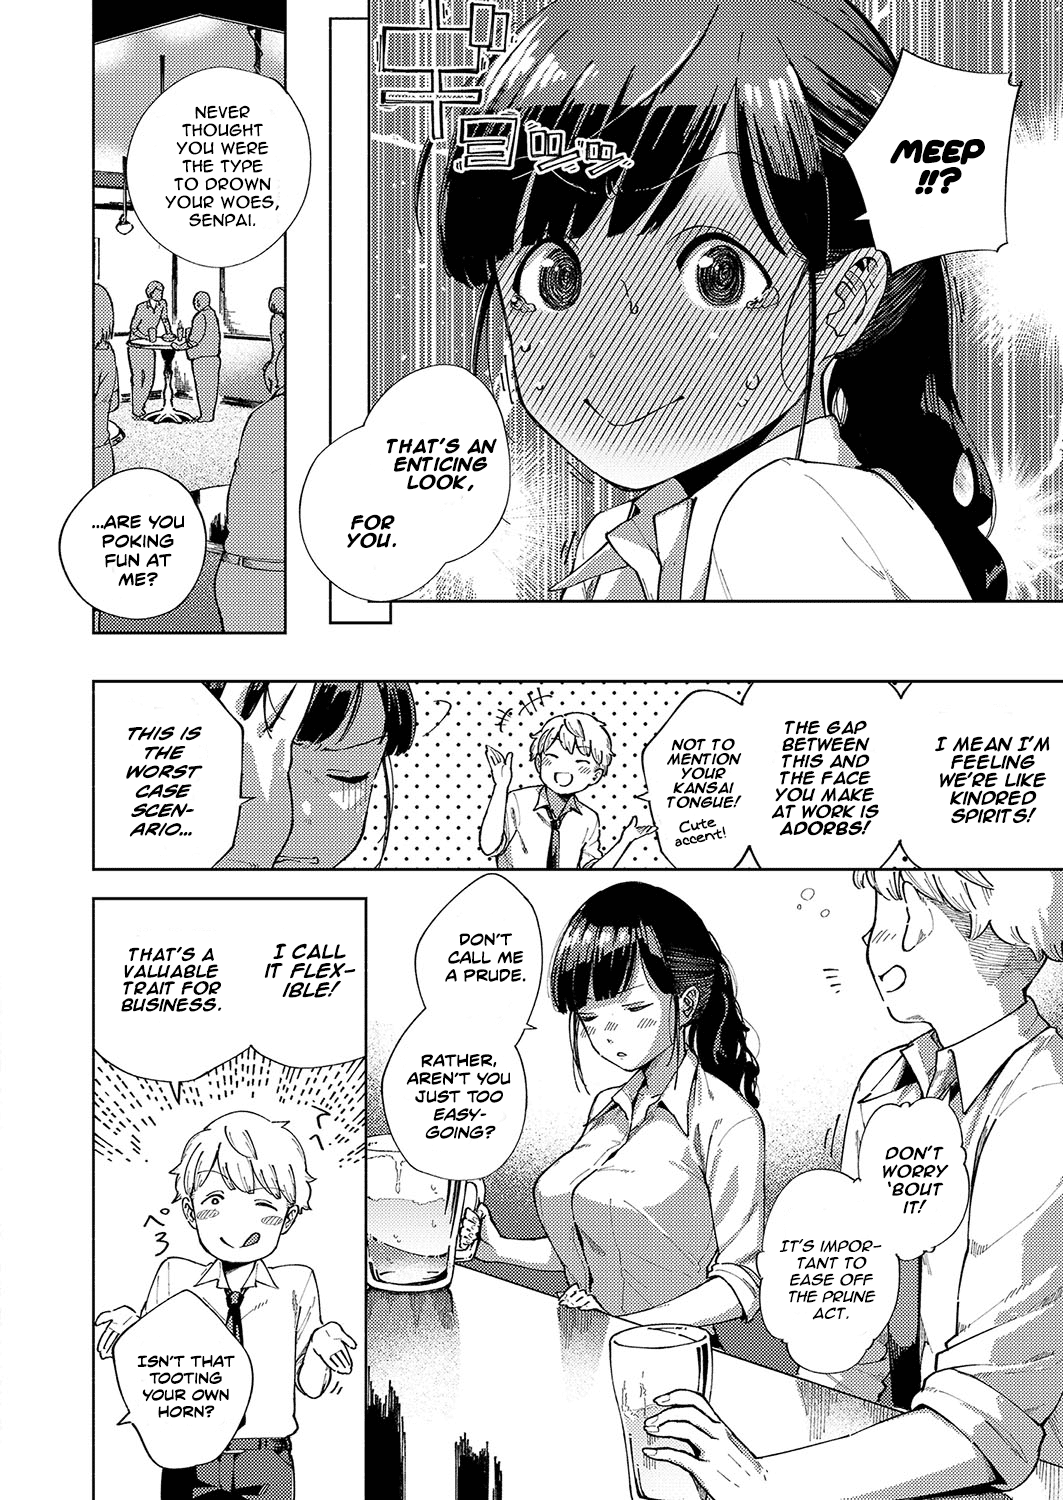 [Herio] Okatai Onna to Iwanaide | Don't call me an Old Maid! (COMIC ExE 15) [English] [Scansforhumanity] [Digital] [ヘリを] お堅い女と言わないで (コミック エグゼ 15) [英訳] [DL版]